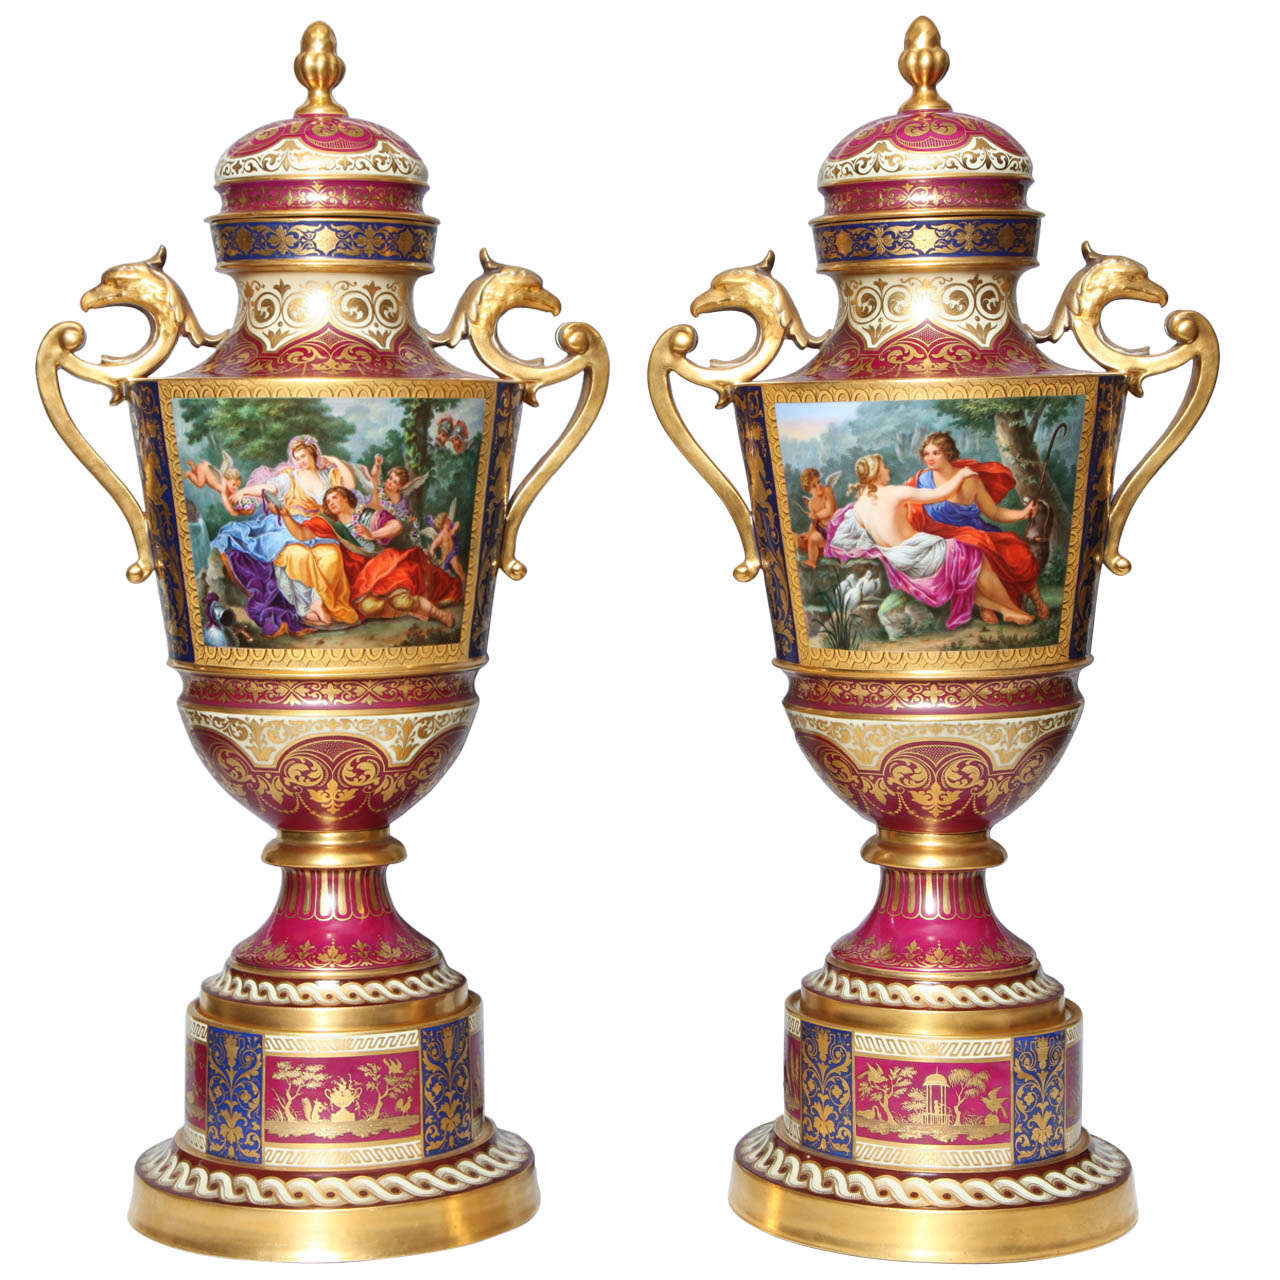 Magnificent Pair Royal Vienna Porcelain Covered Urns on Stands with Eagles For Sale